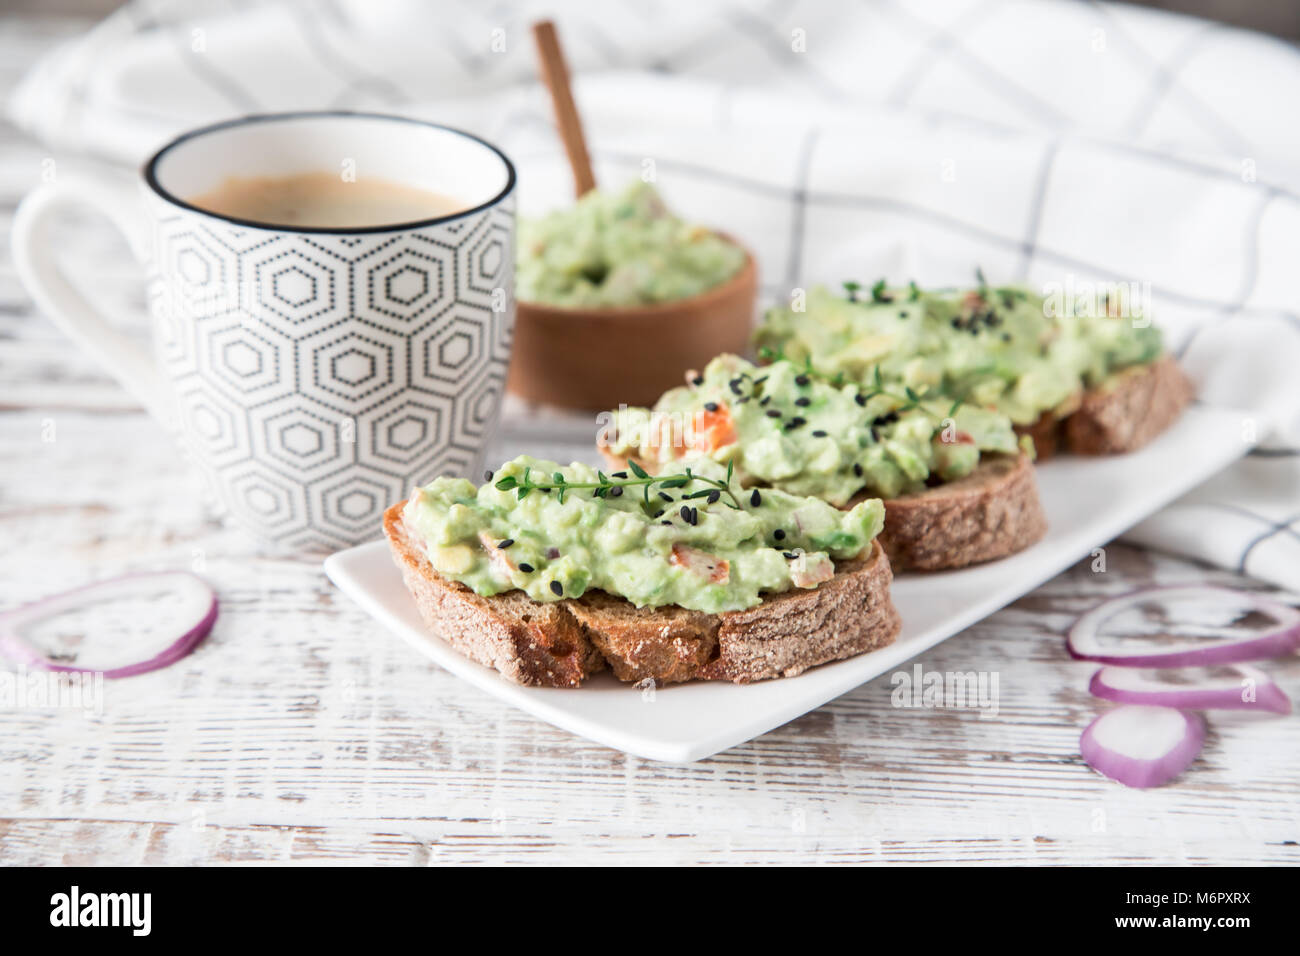 toast with guacamole, seeds and herbs. A cup of coffee. Healyhy Breakfast concept. Stock Photo